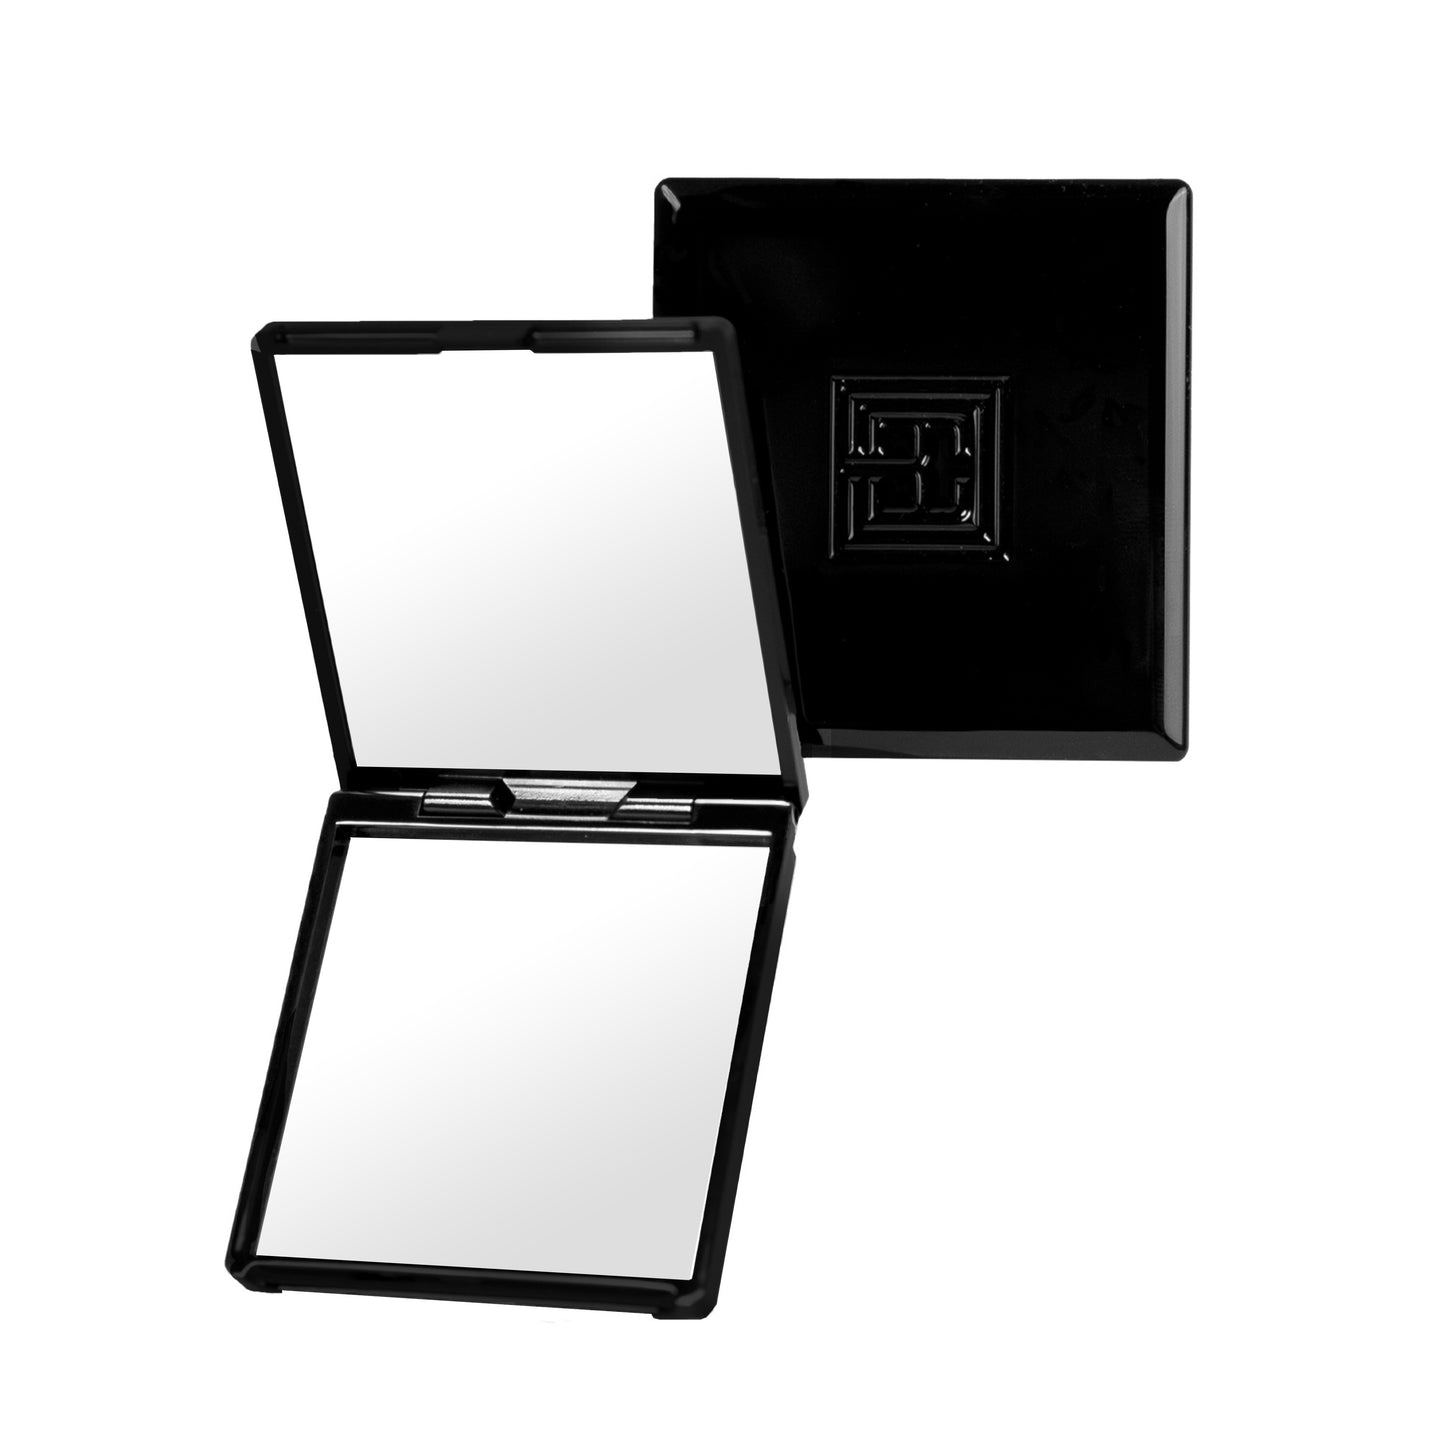 Compact Mirror both open and closed against a white background